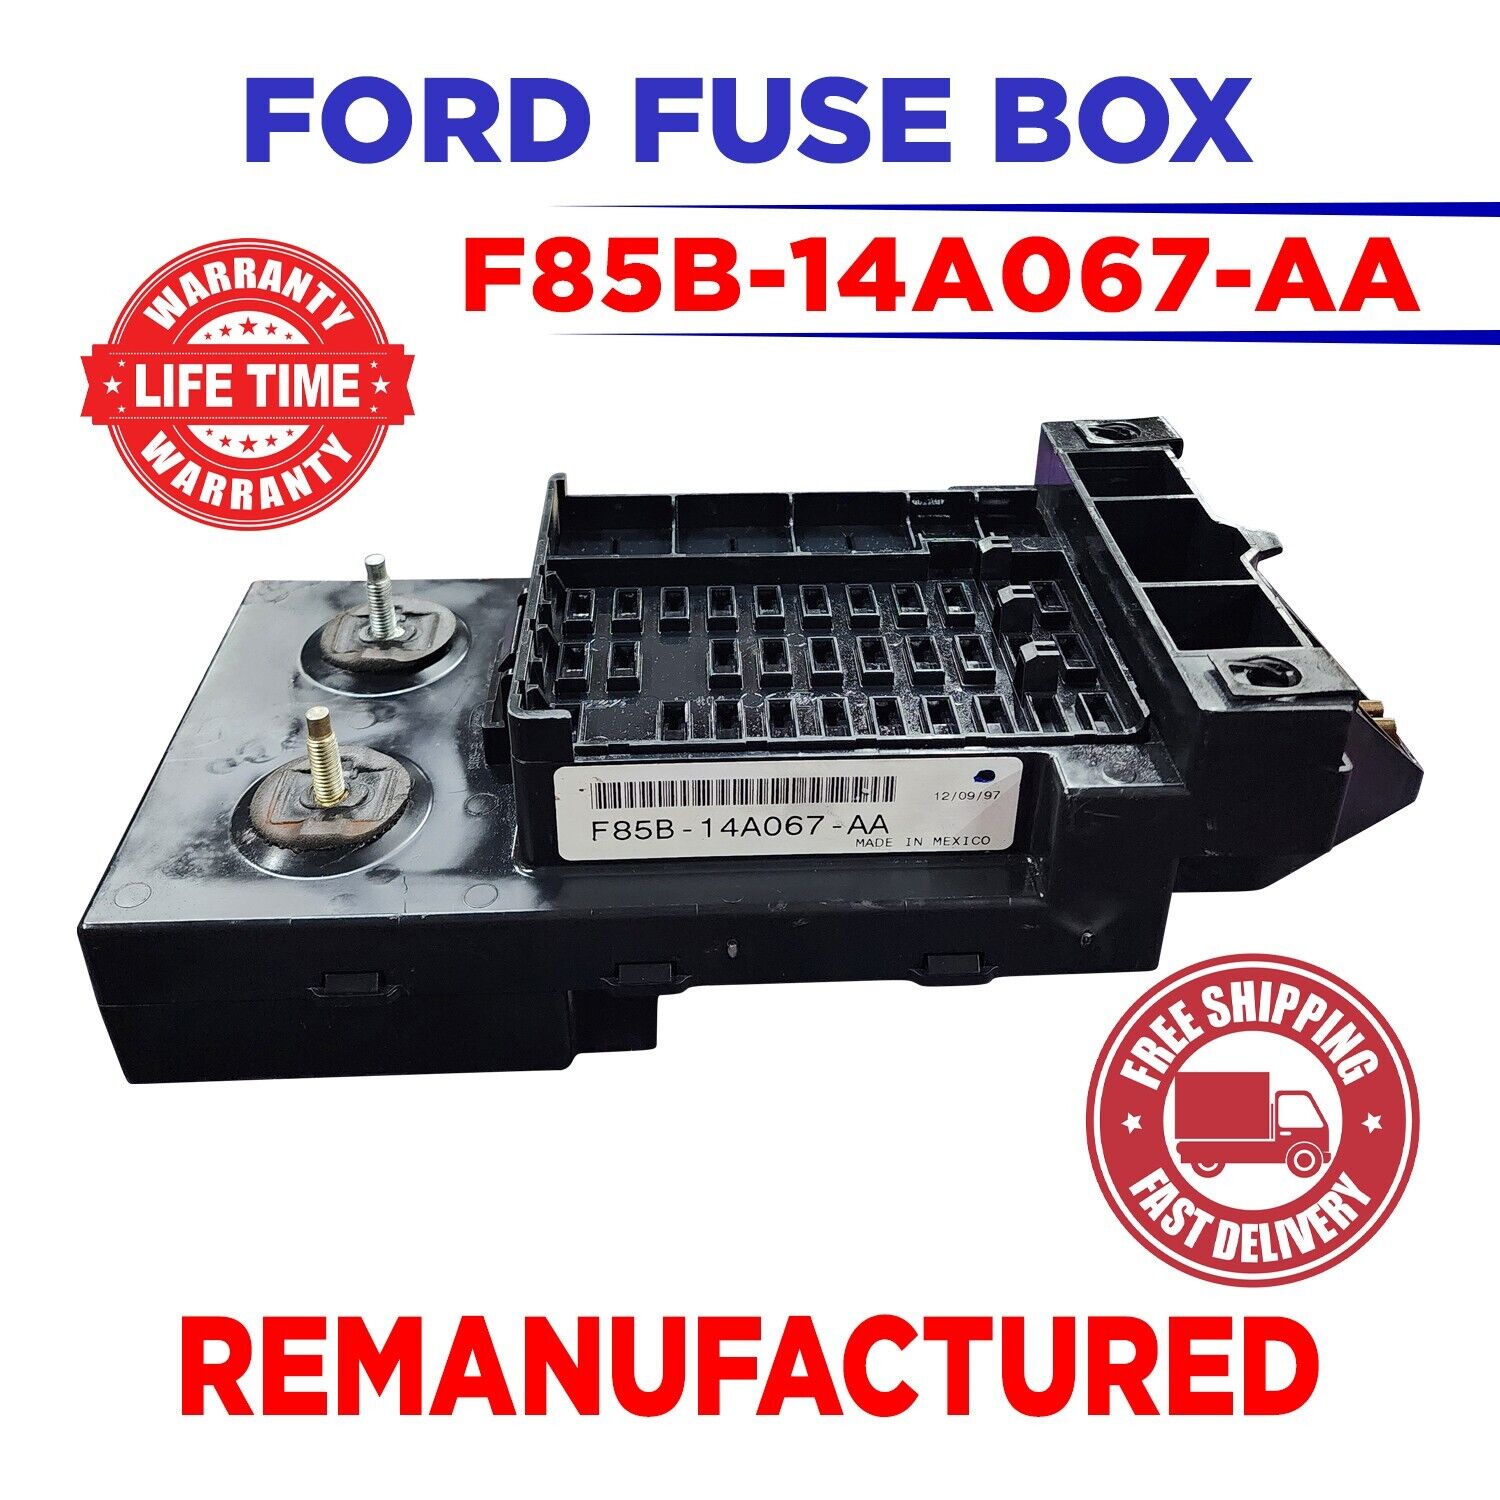 Rebuilt F85B-14A067-AA 1998 Ford F150 Expedition Fuse box